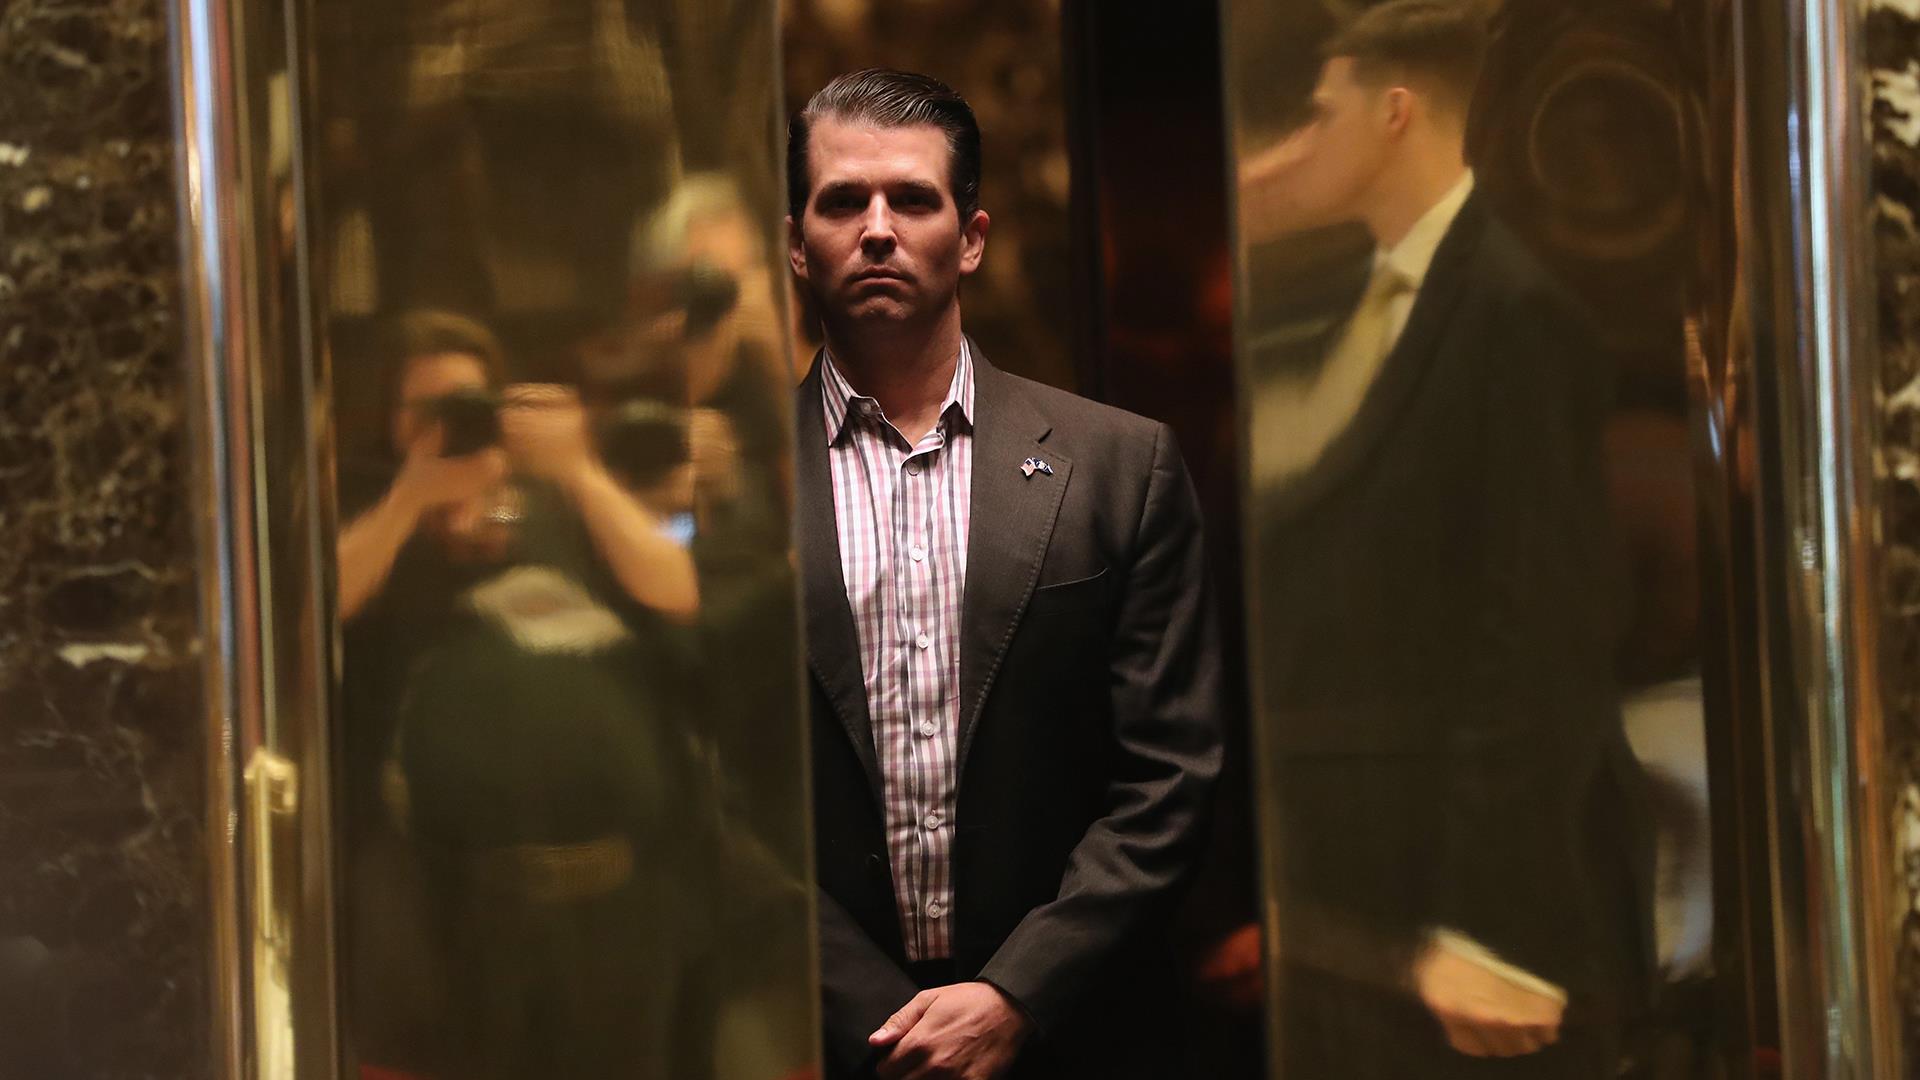 Donald Trump Jr. asked Russian lawyer for info on Clinton Foundation1920 x 1080